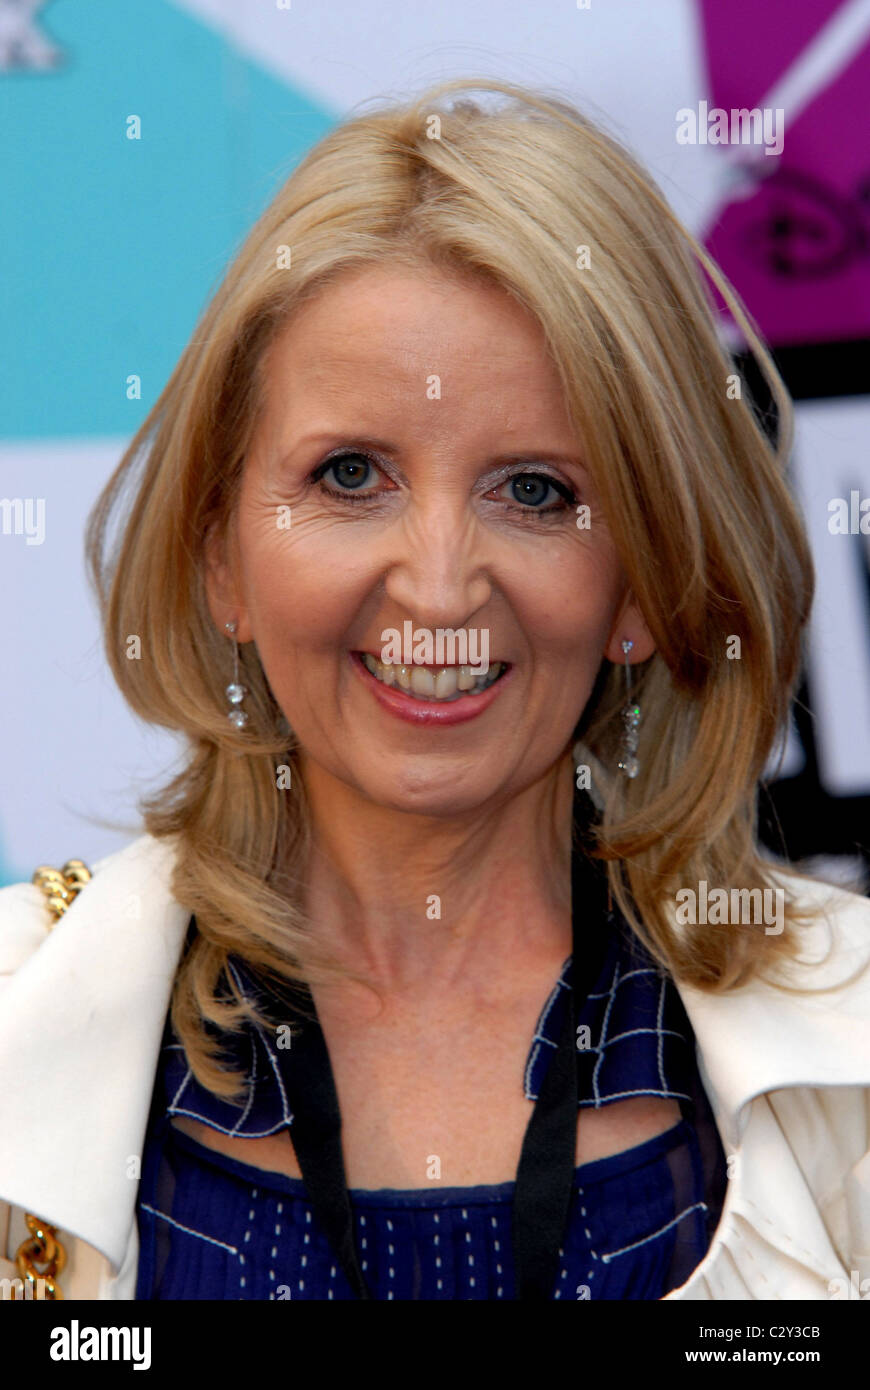 Gillian McKeith Camp Rock - European TV premiere held at the Royal Festival Hall - Arrivals London, England - 10.09.08 Vince Stock Photo